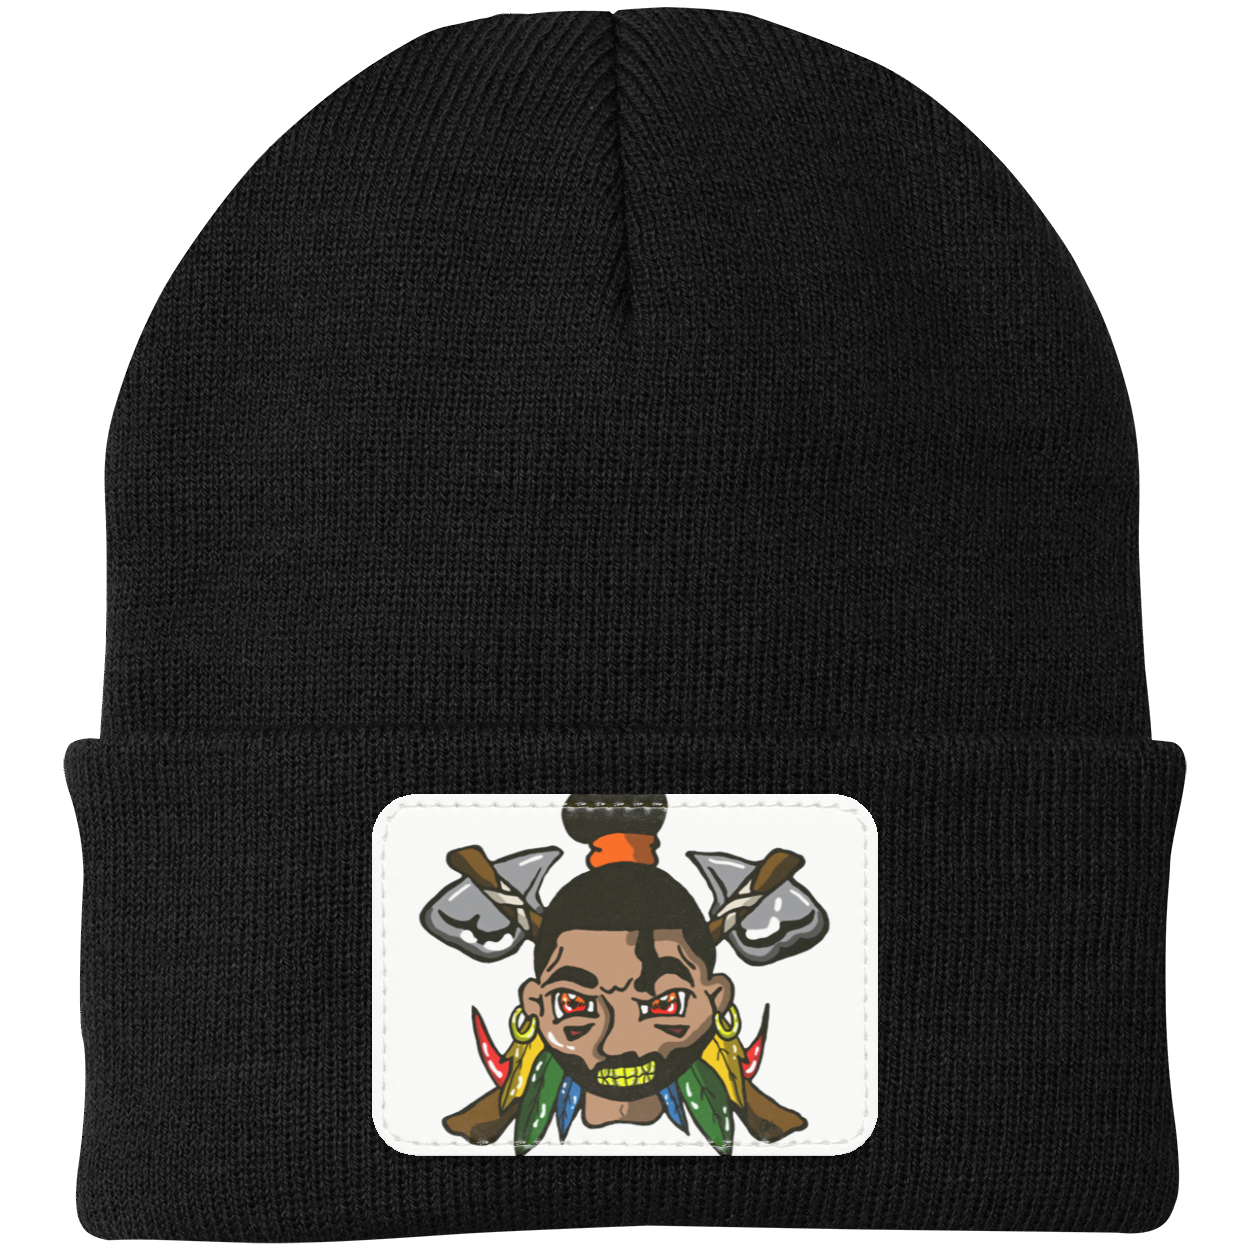 Day Life Knit Cap - Patch